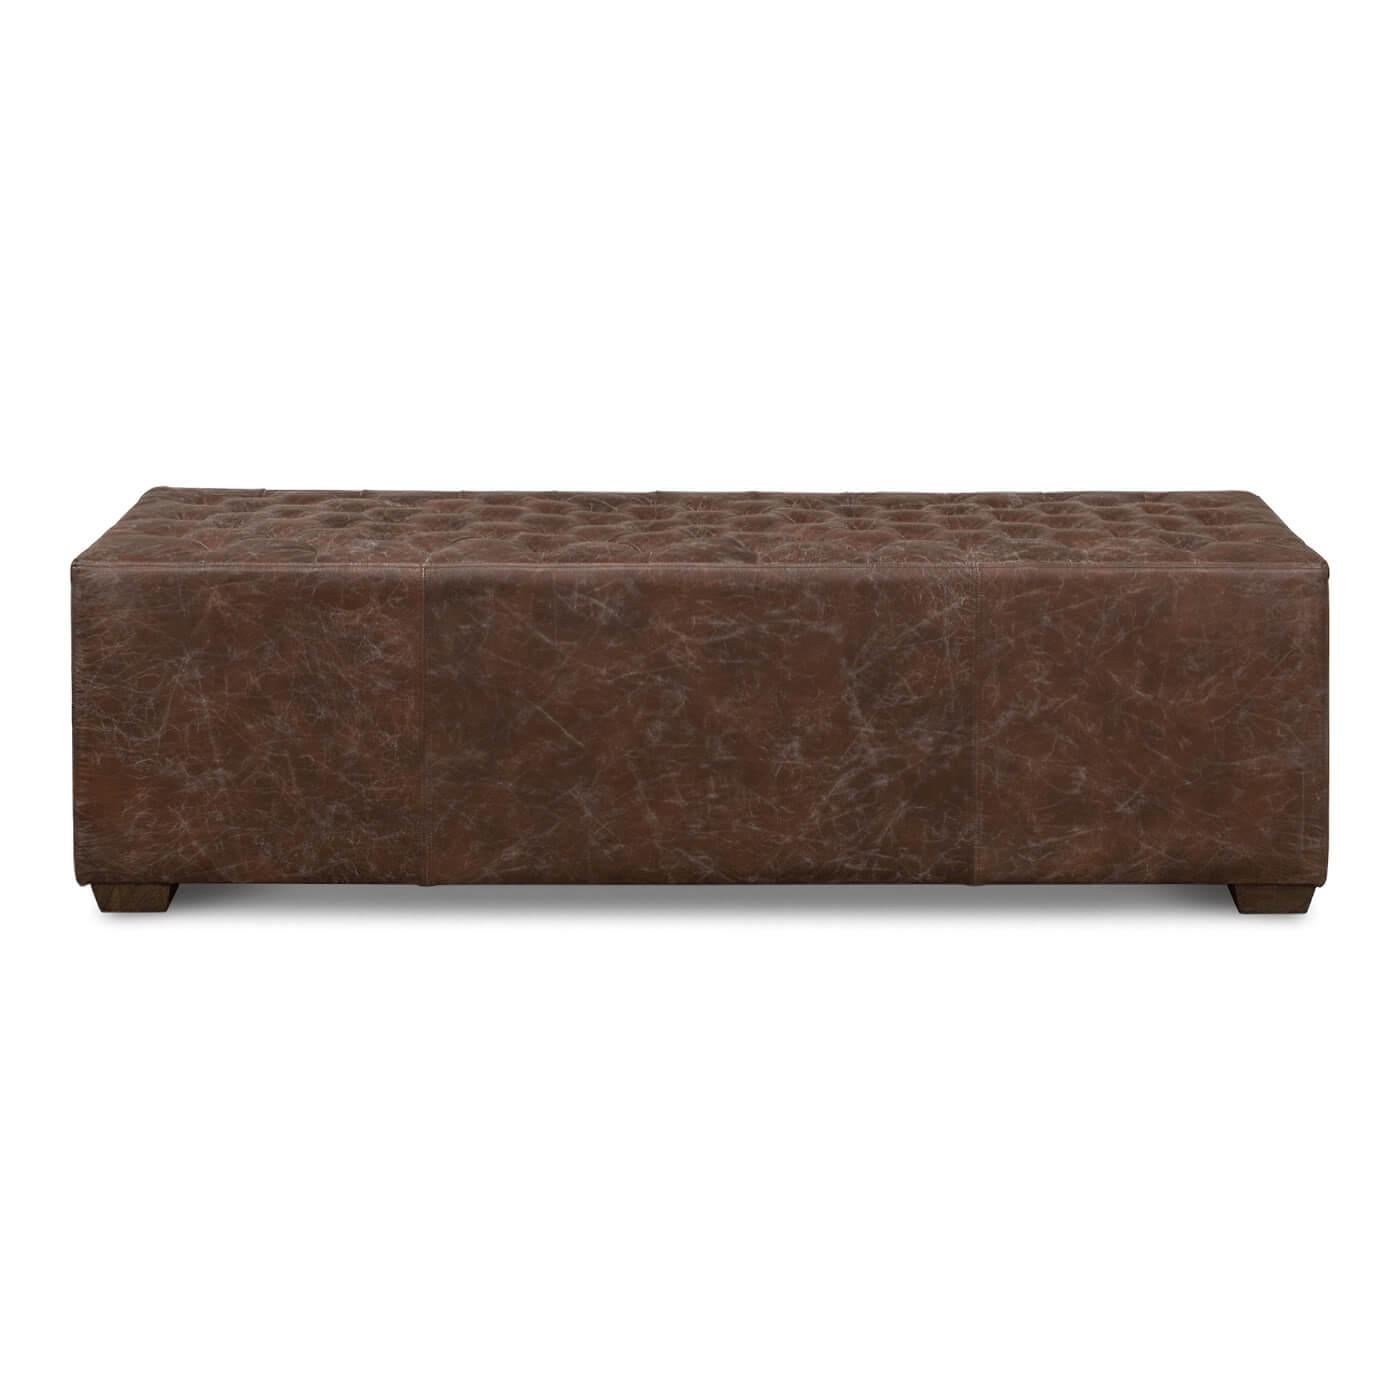 A distressed brown leather bench with a button-tufted top. It rests on oak block legs and has metal handles on the sides. 

Dimensions
59 in. W x 18 in. D x 17 in. H.


